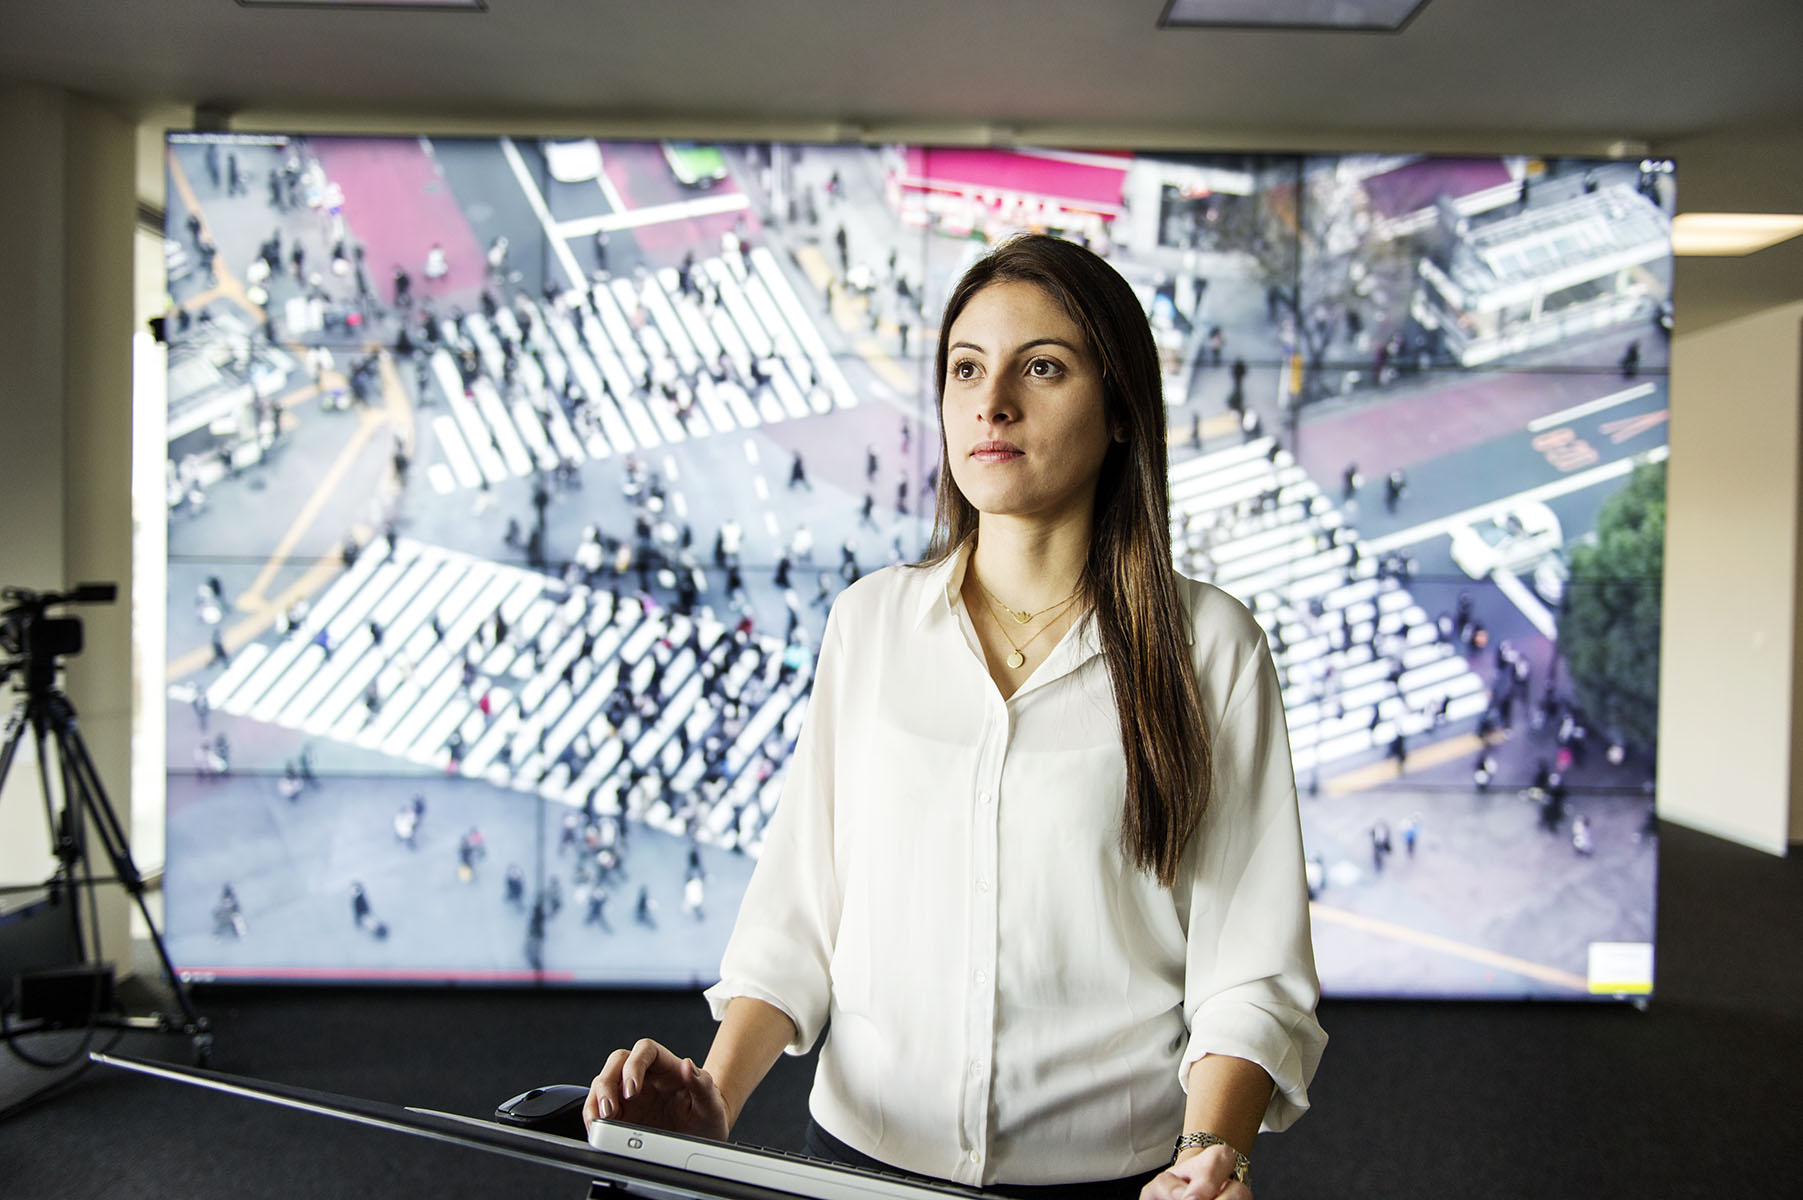 Enlarged view: Urban climate expert Estefania Tapias has been nominated for the &quot;Forbes 30 under 30&quot; list in the category Science. (Photograph: Florian Bachmann)